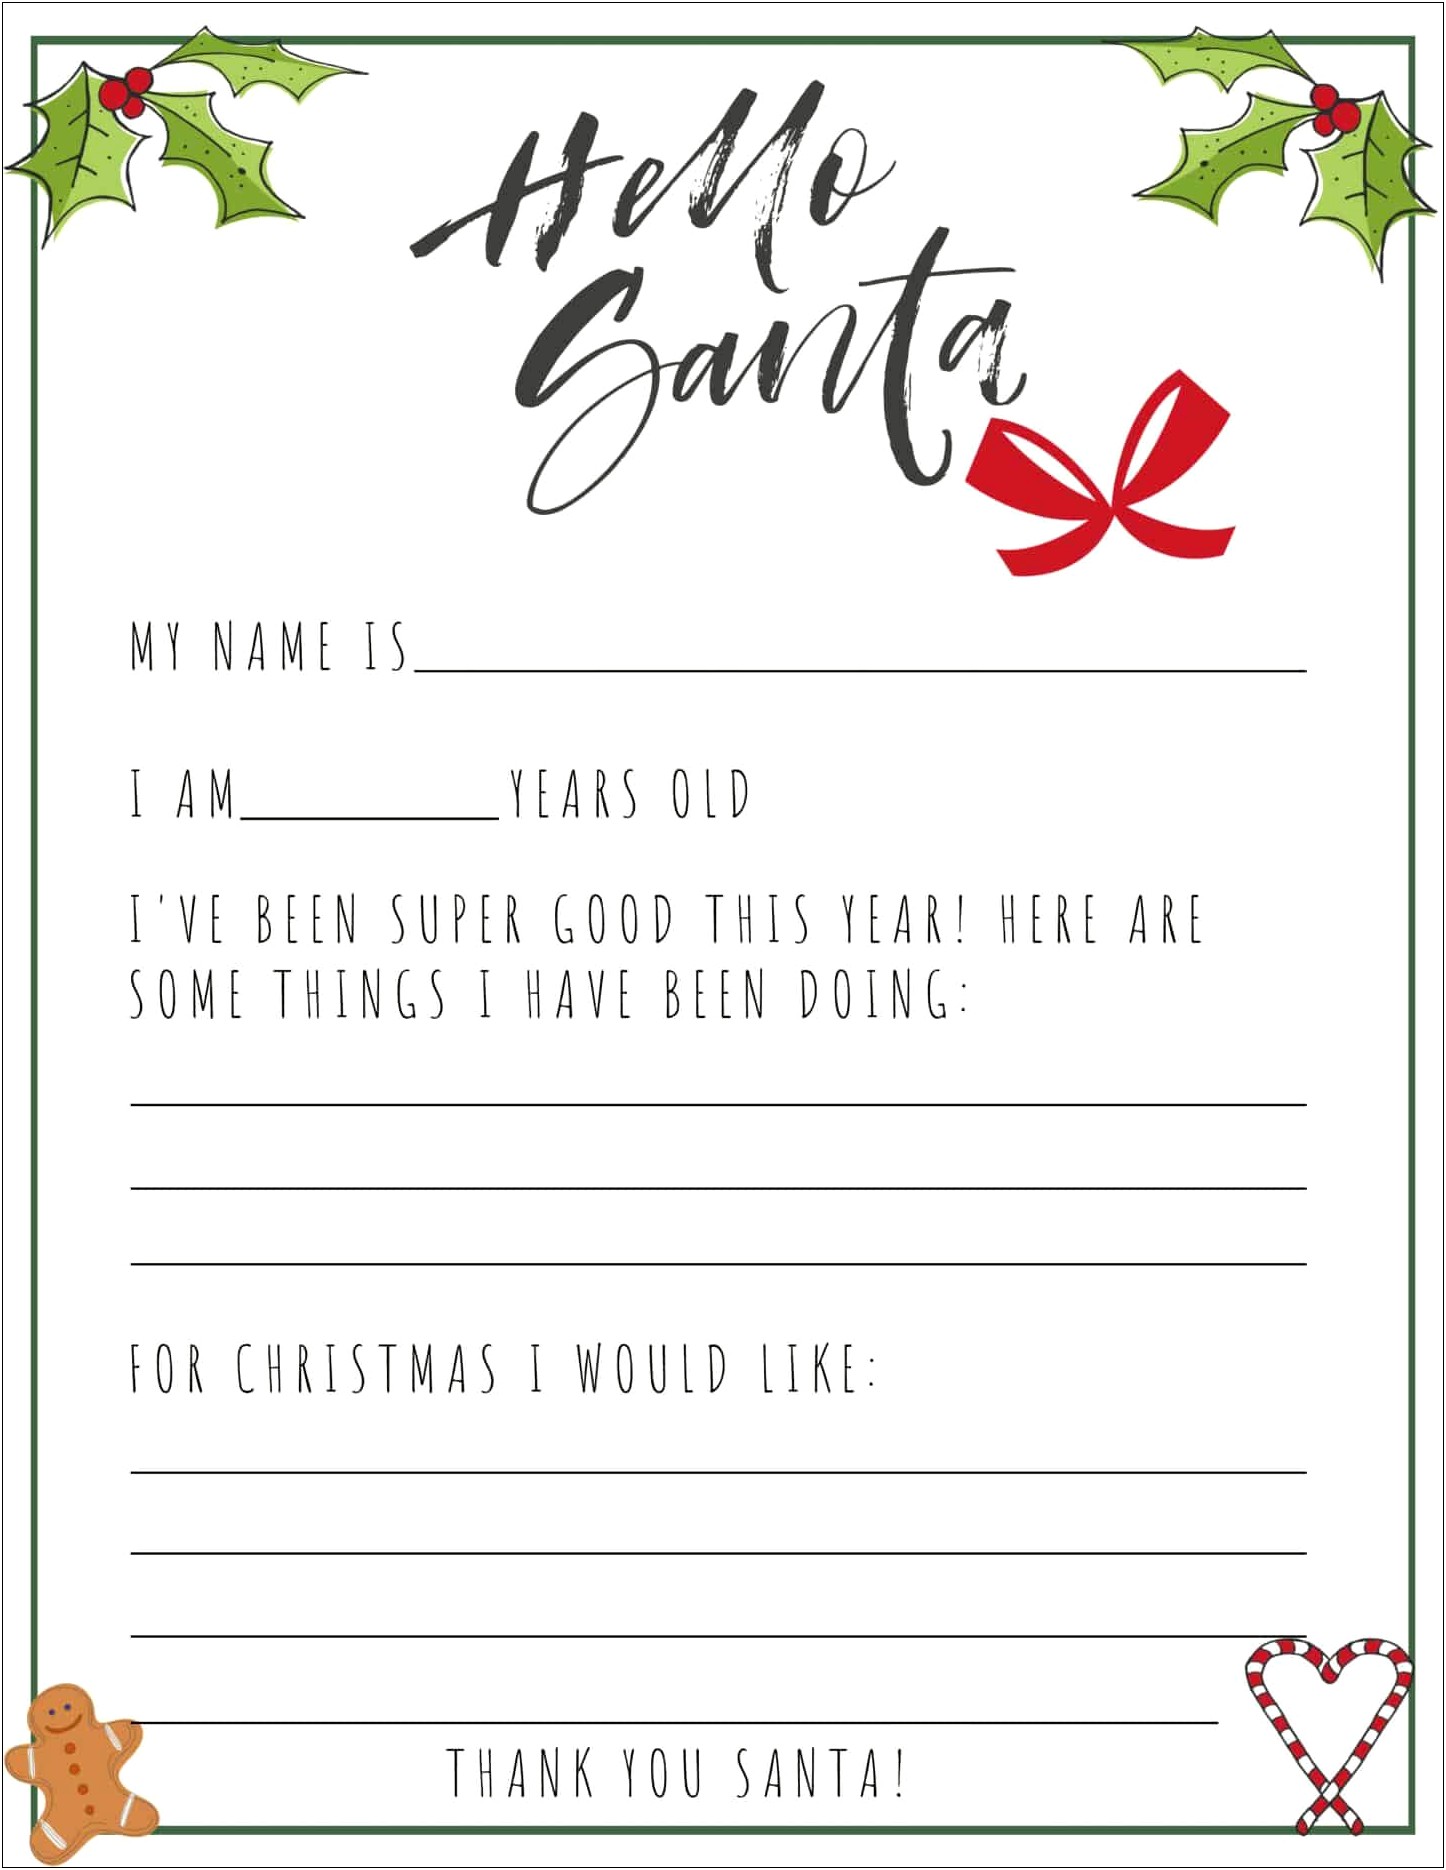 A Letter From Santa Blank Template